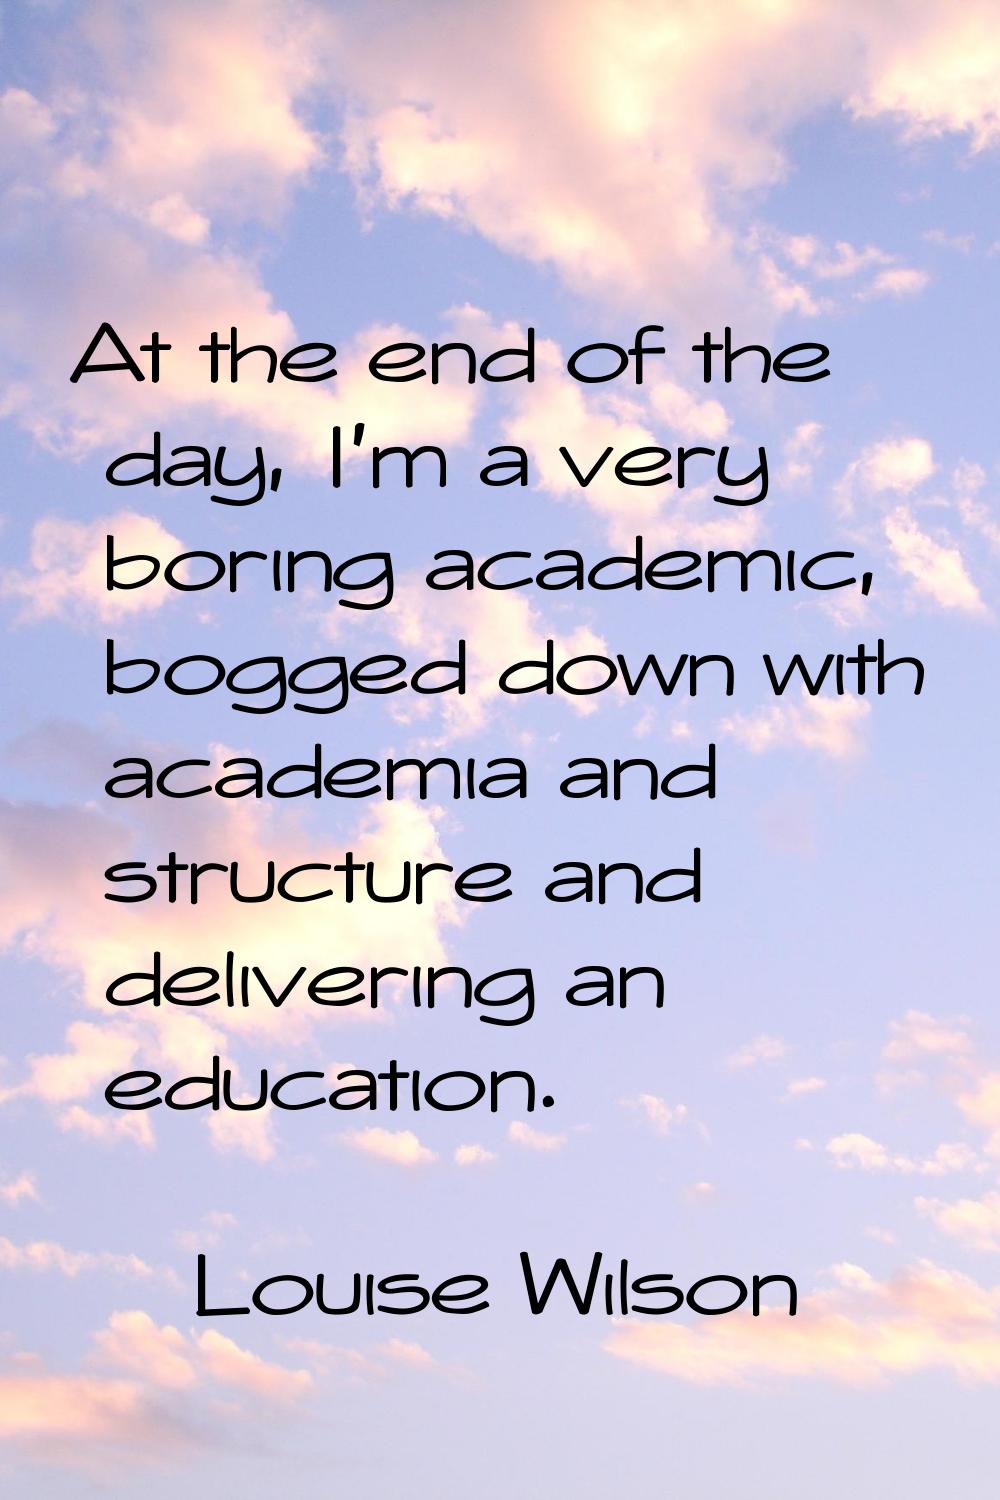 At the end of the day, I'm a very boring academic, bogged down with academia and structure and deli